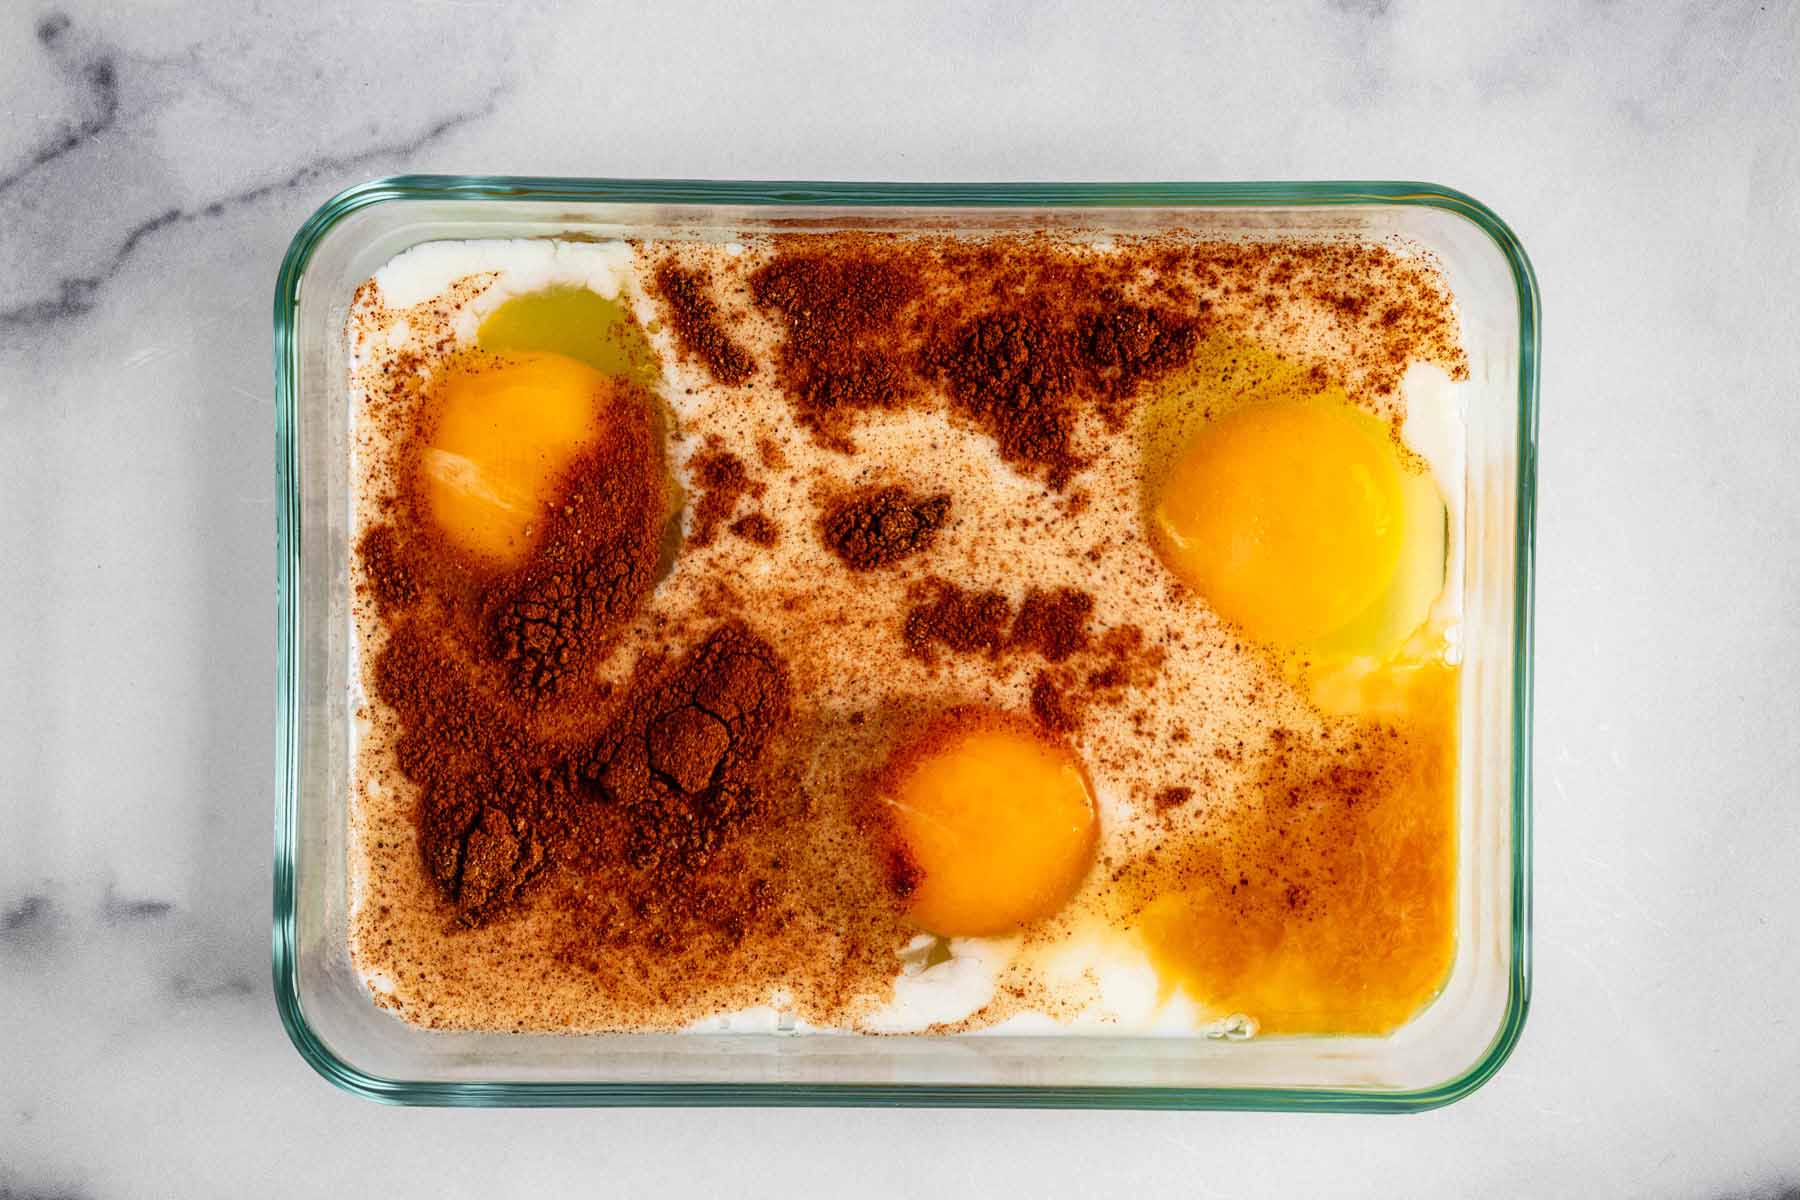 Eggs, milk, sugar, vanilla extract, cinnamon, and nutmeg in a small glass rectangular container.